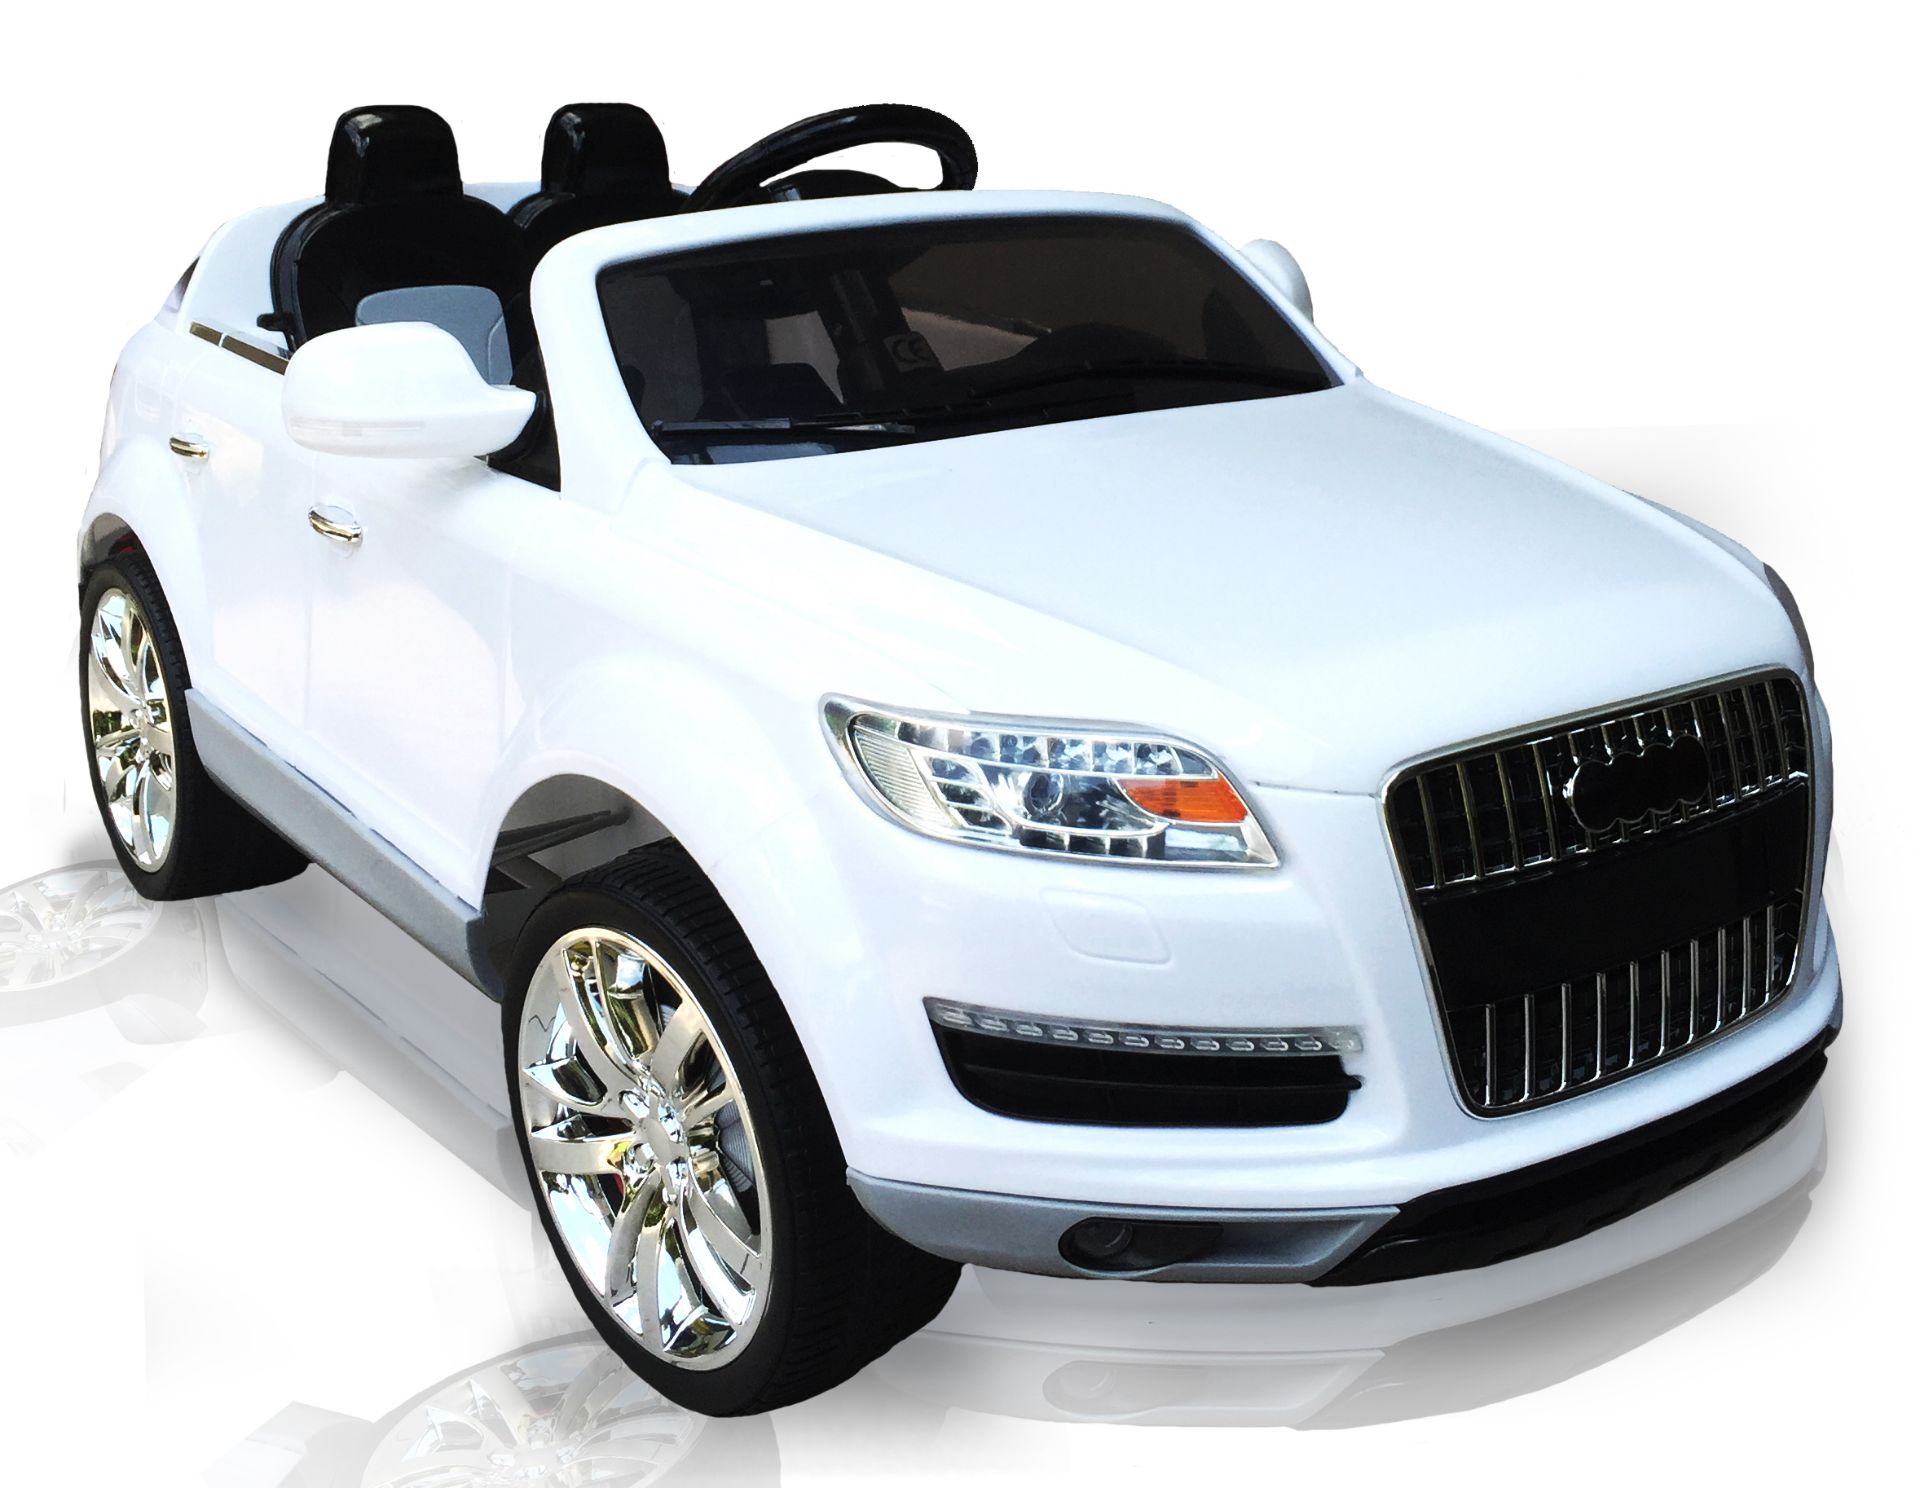 V Brand New Audi Q7 Ride In Car Up To 5 MPH Engine & Horn Sound-Rear Suspension-Foldable Mirrors-12V